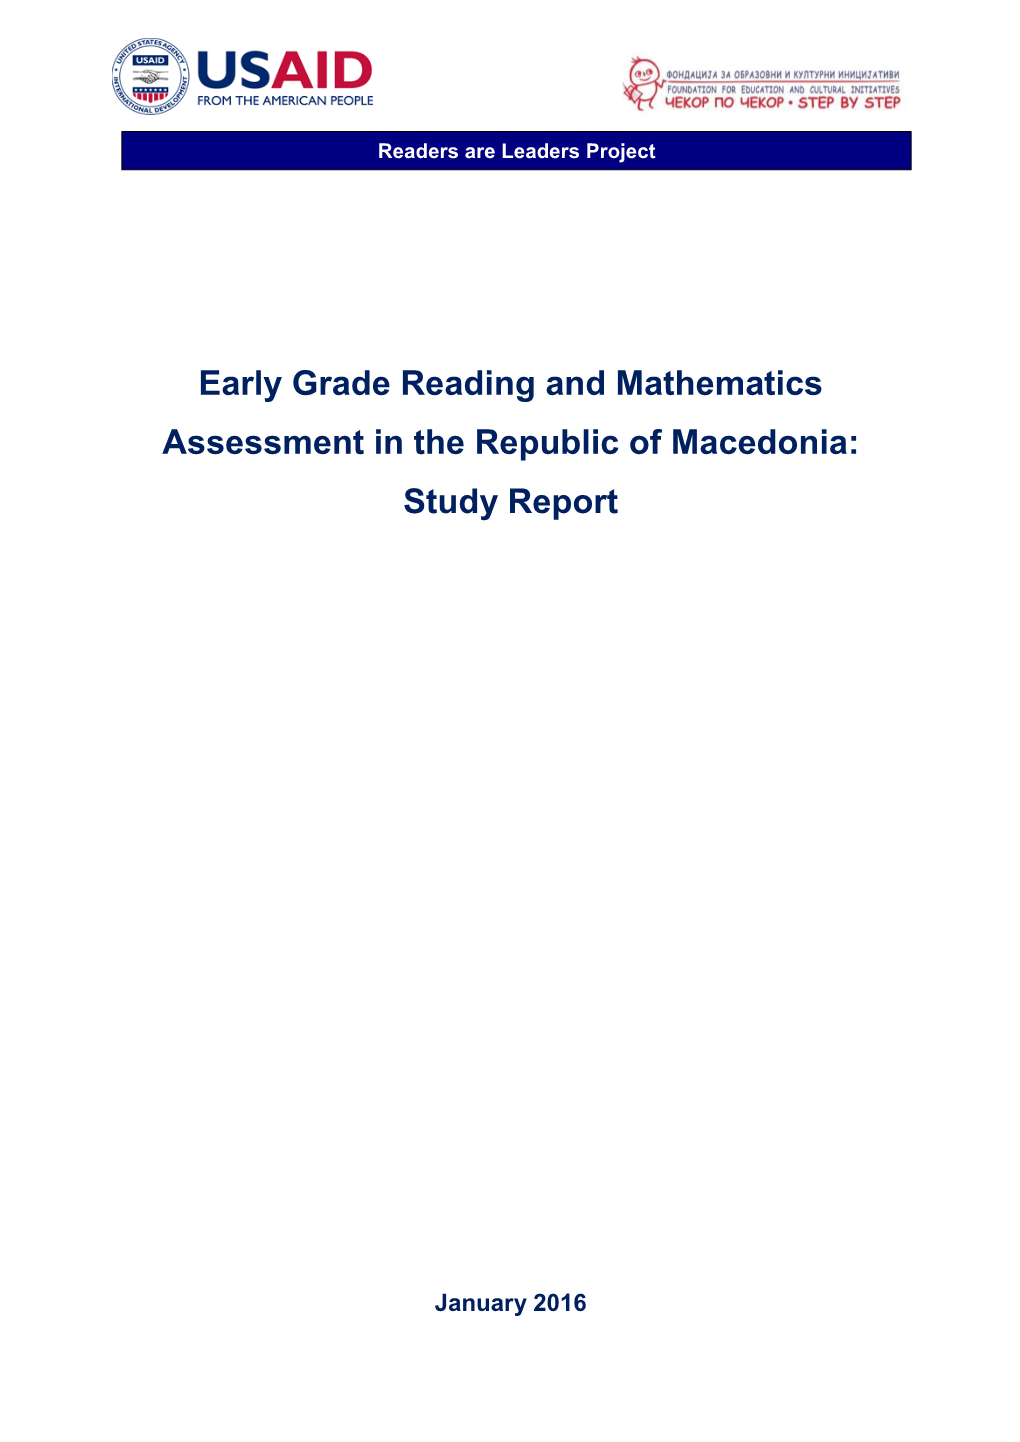 Early Grade Reading and Mathematics Assessment in the Republic of Macedonia: Study Report